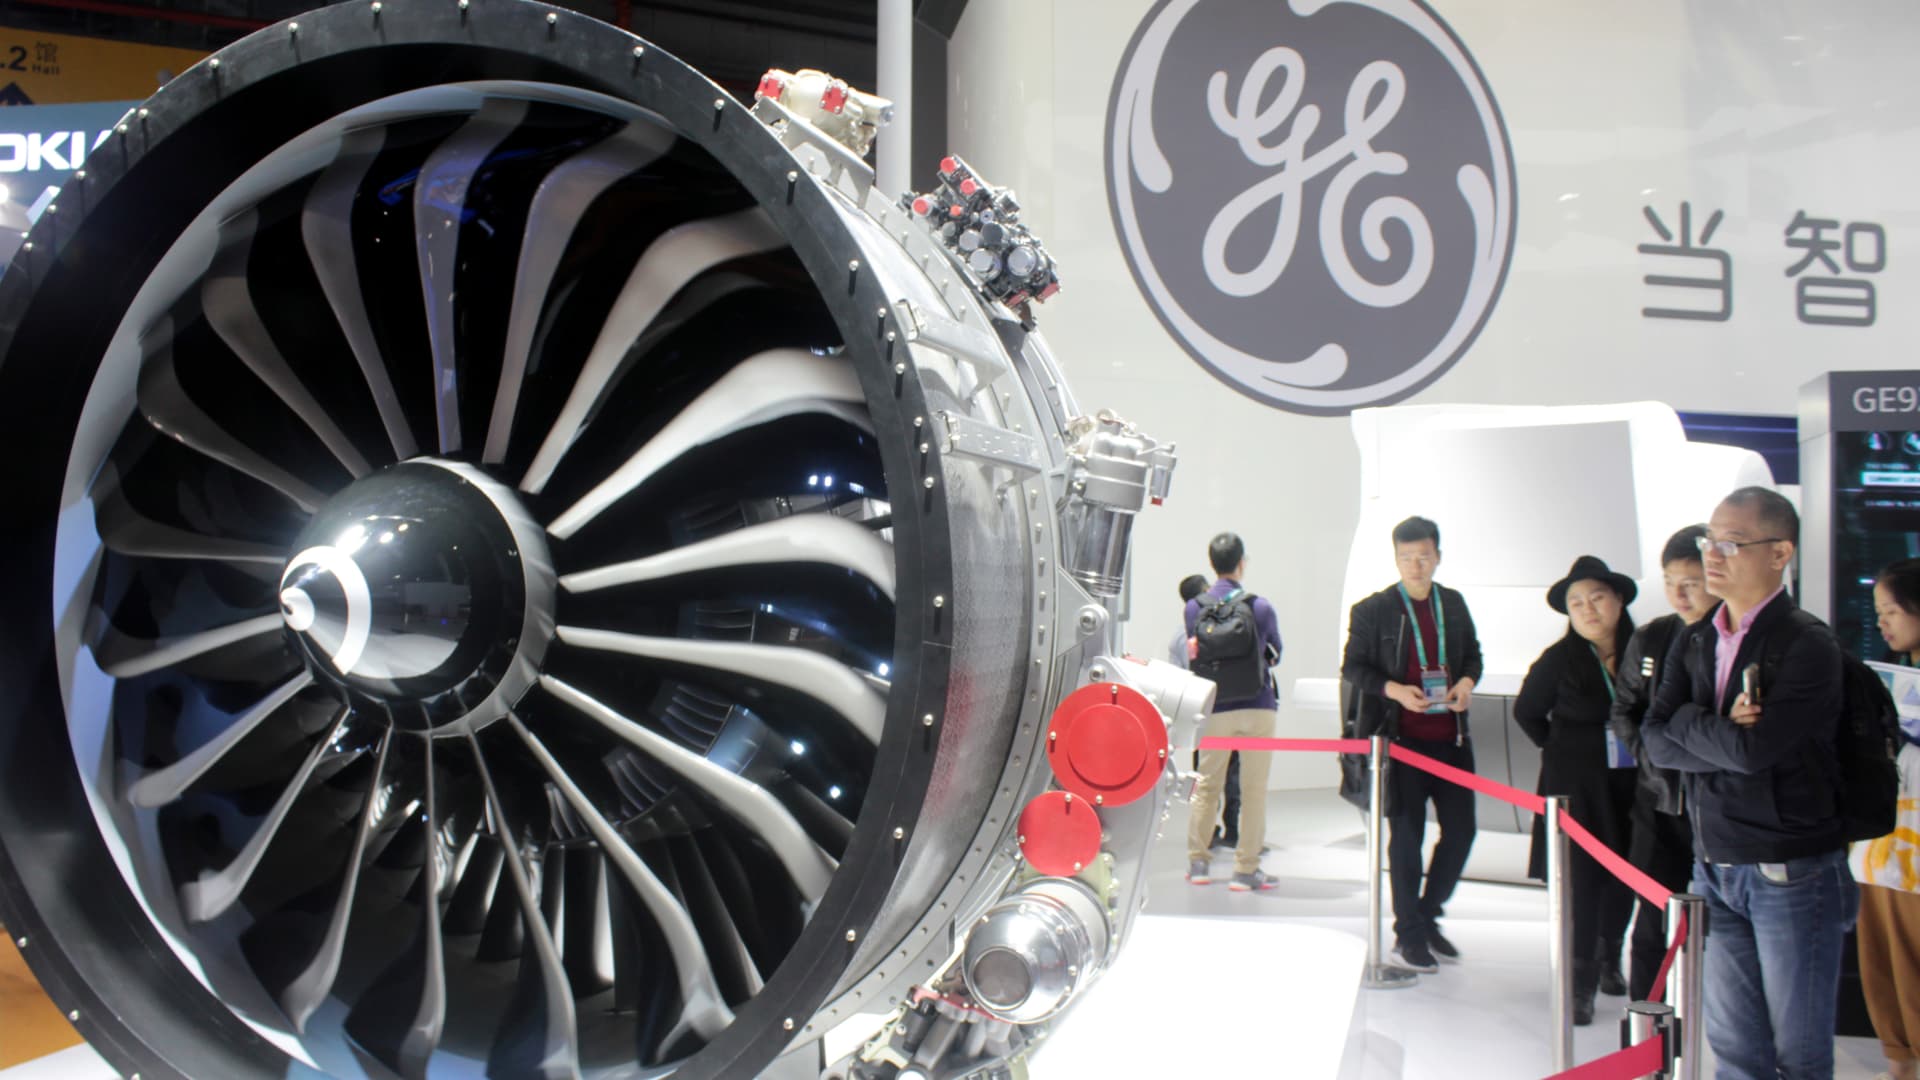 GE reveals new company names as it approaches historic split